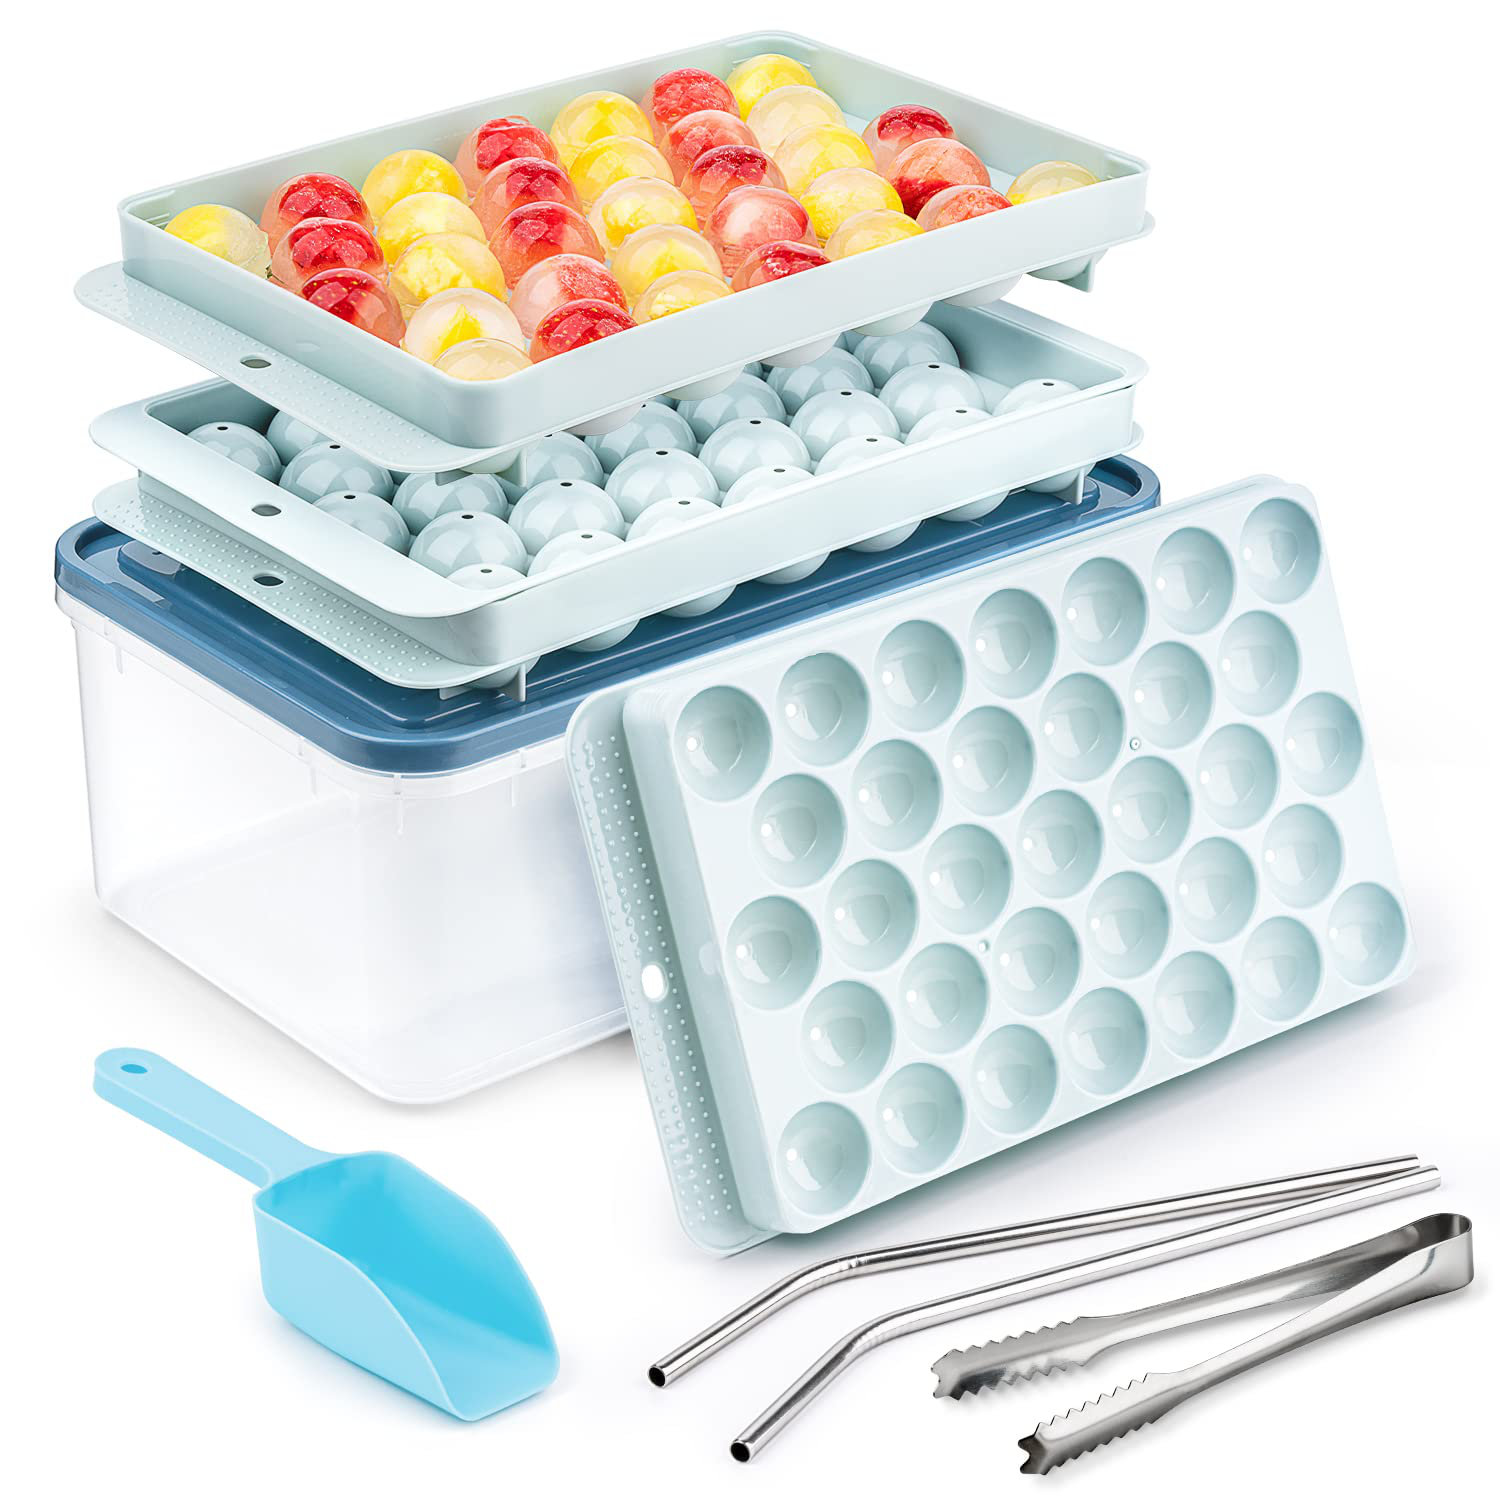 Sphere Ice Cube Trays with Lids & Bucket - Makes 66 Small Round Ice Cubes  for Freezer (2 Blue Trays)